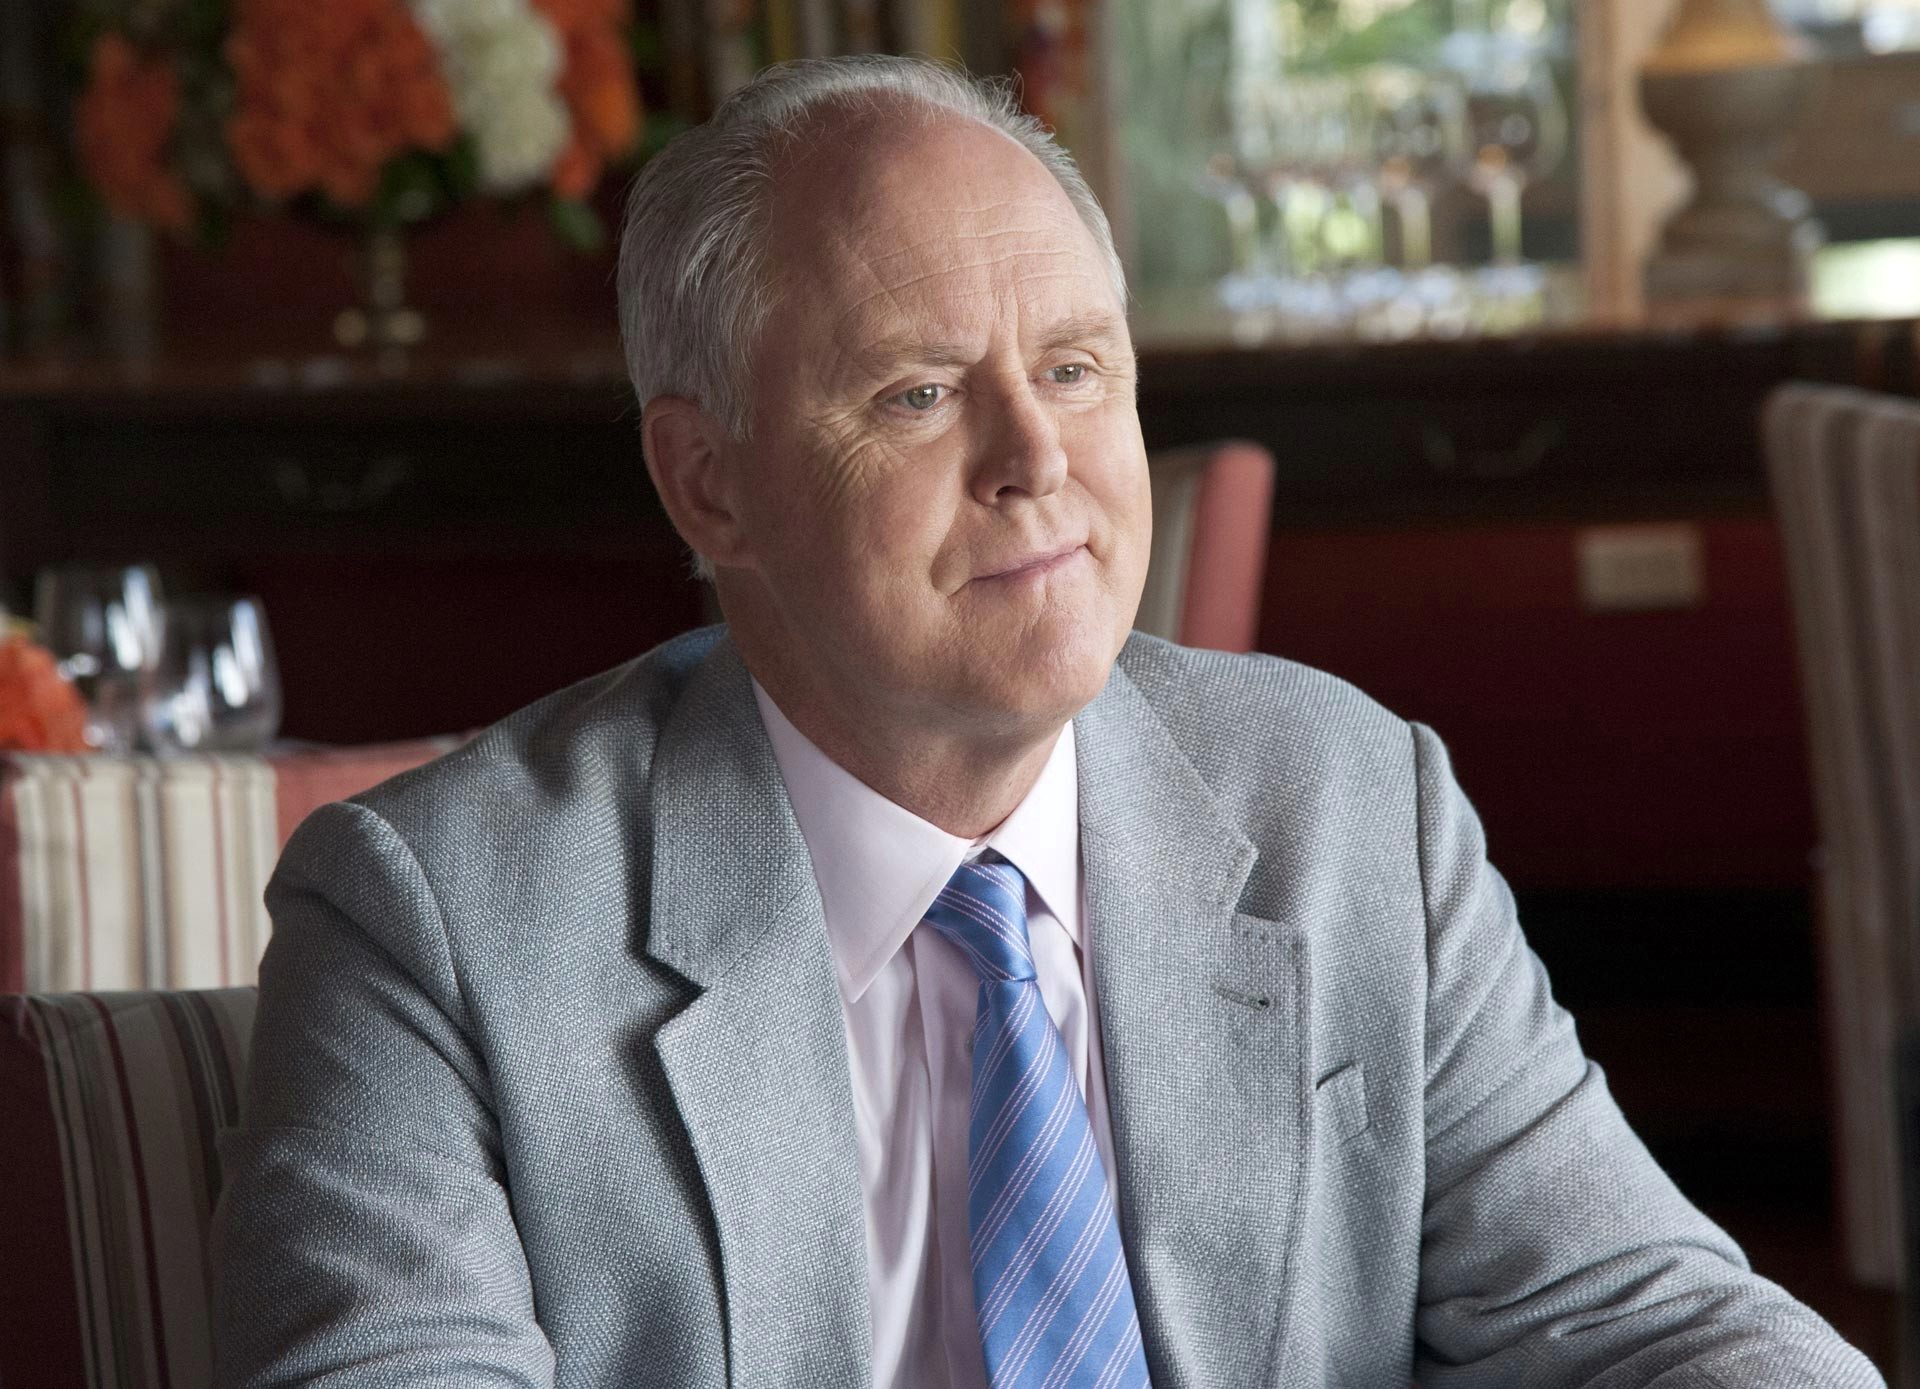 John Lithgow stars as Oliver in Universal Pictures' This Is 40 (2012)